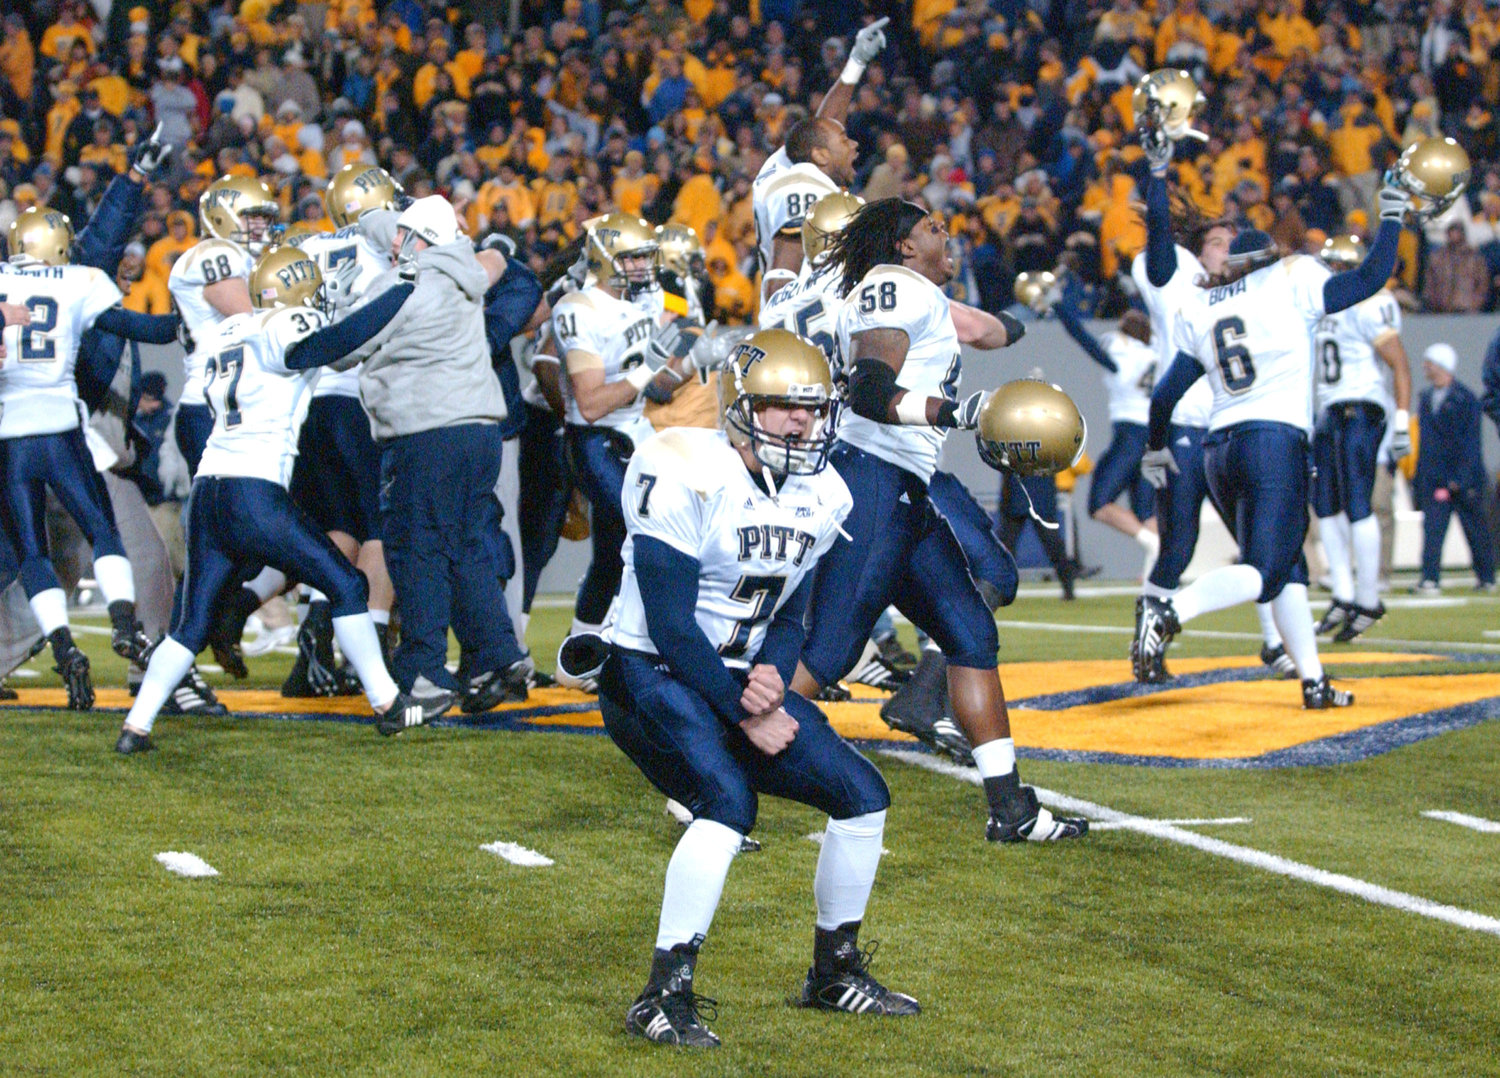 FILE - Pittsburgh's Steve Malinchak (7) and teammates celebrate their 13-9 upset win over No. 2 West Virginia in an NCAA college football game Dec. 1, 2007, in Morgantown, W.Va. The rivalry between the longtime rivals will be renewed following an 11-year hiatus on Thursday, Sept. 1, 2022, when the 17th-ranked Panthers host the Mountaineers. (AP Photo/Jeff Gentner, File)